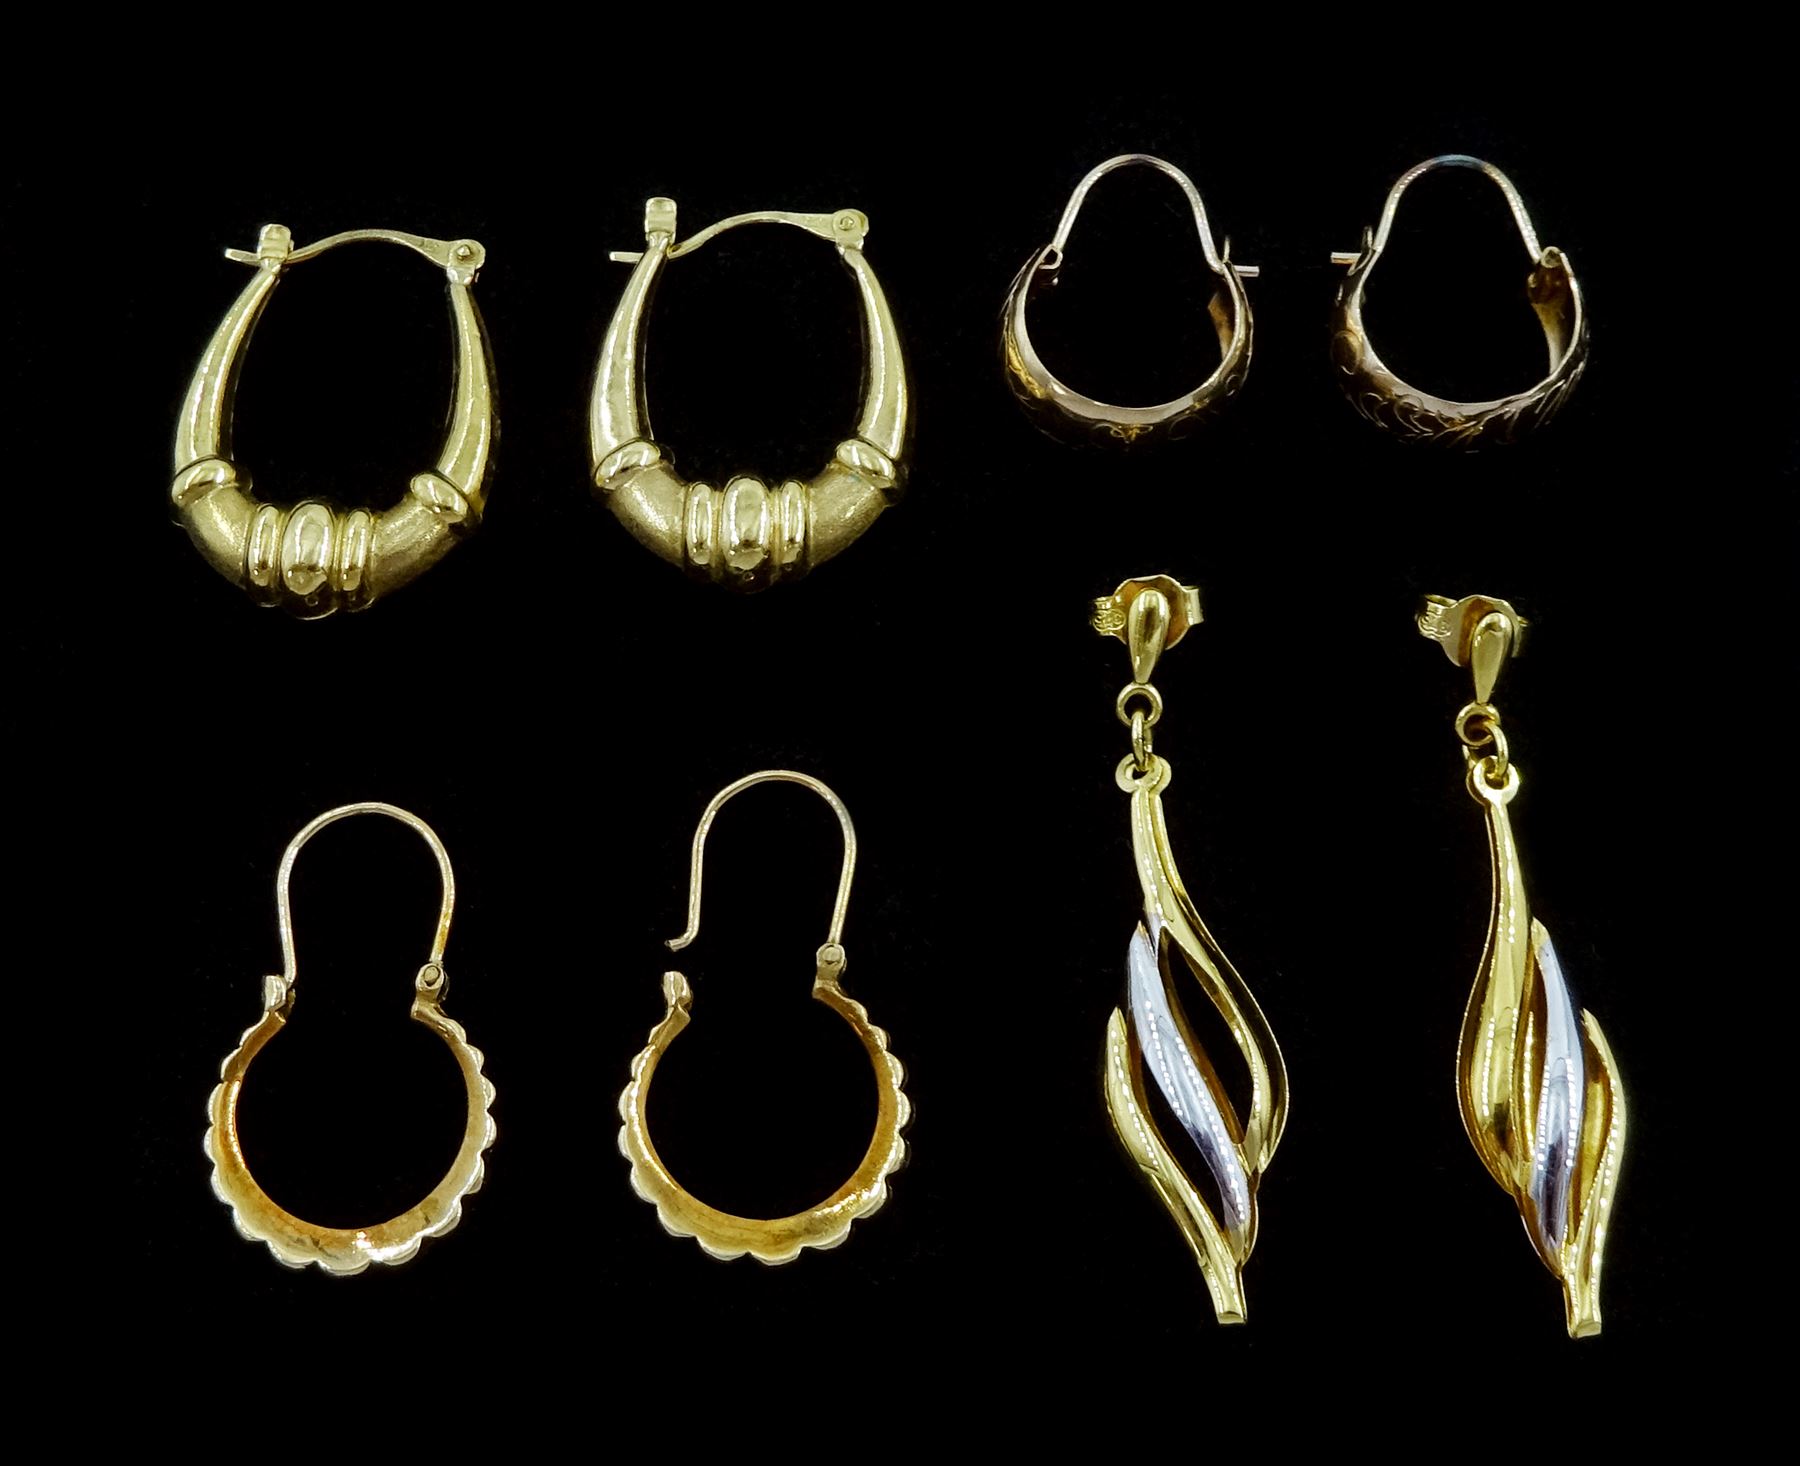 Three pairs of gold hoop earrings and one other pair of gold twist earrings